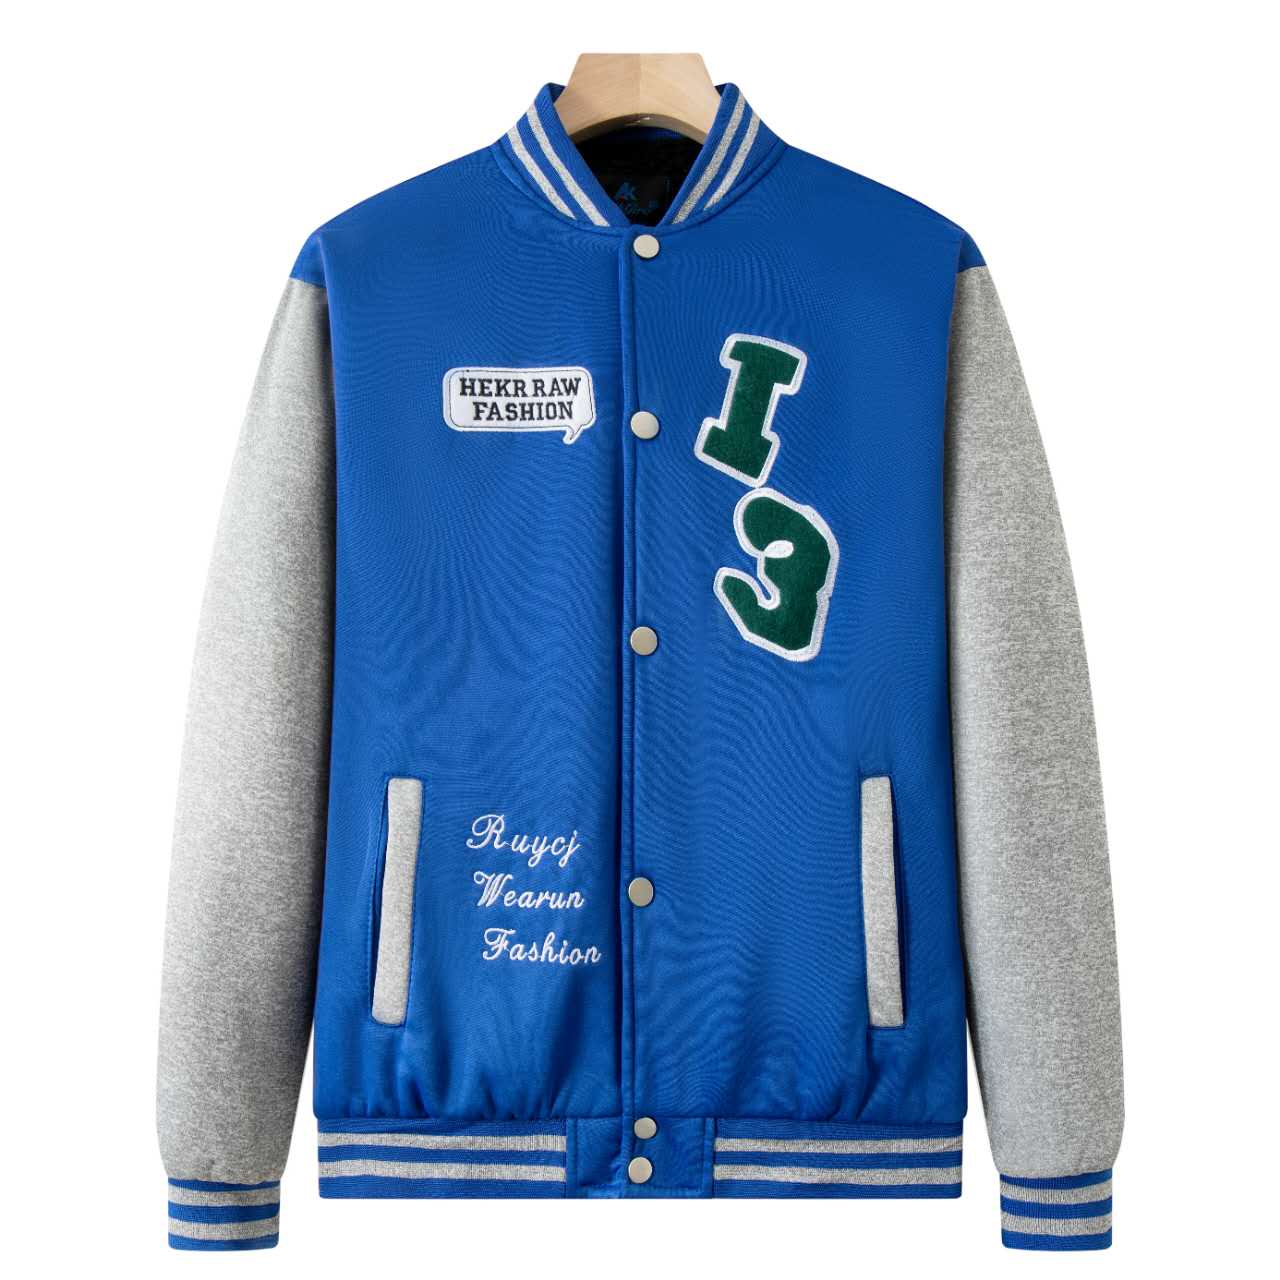 New arrival and brand new of korean varsity jacket style and high quality  for men and women #BJ E